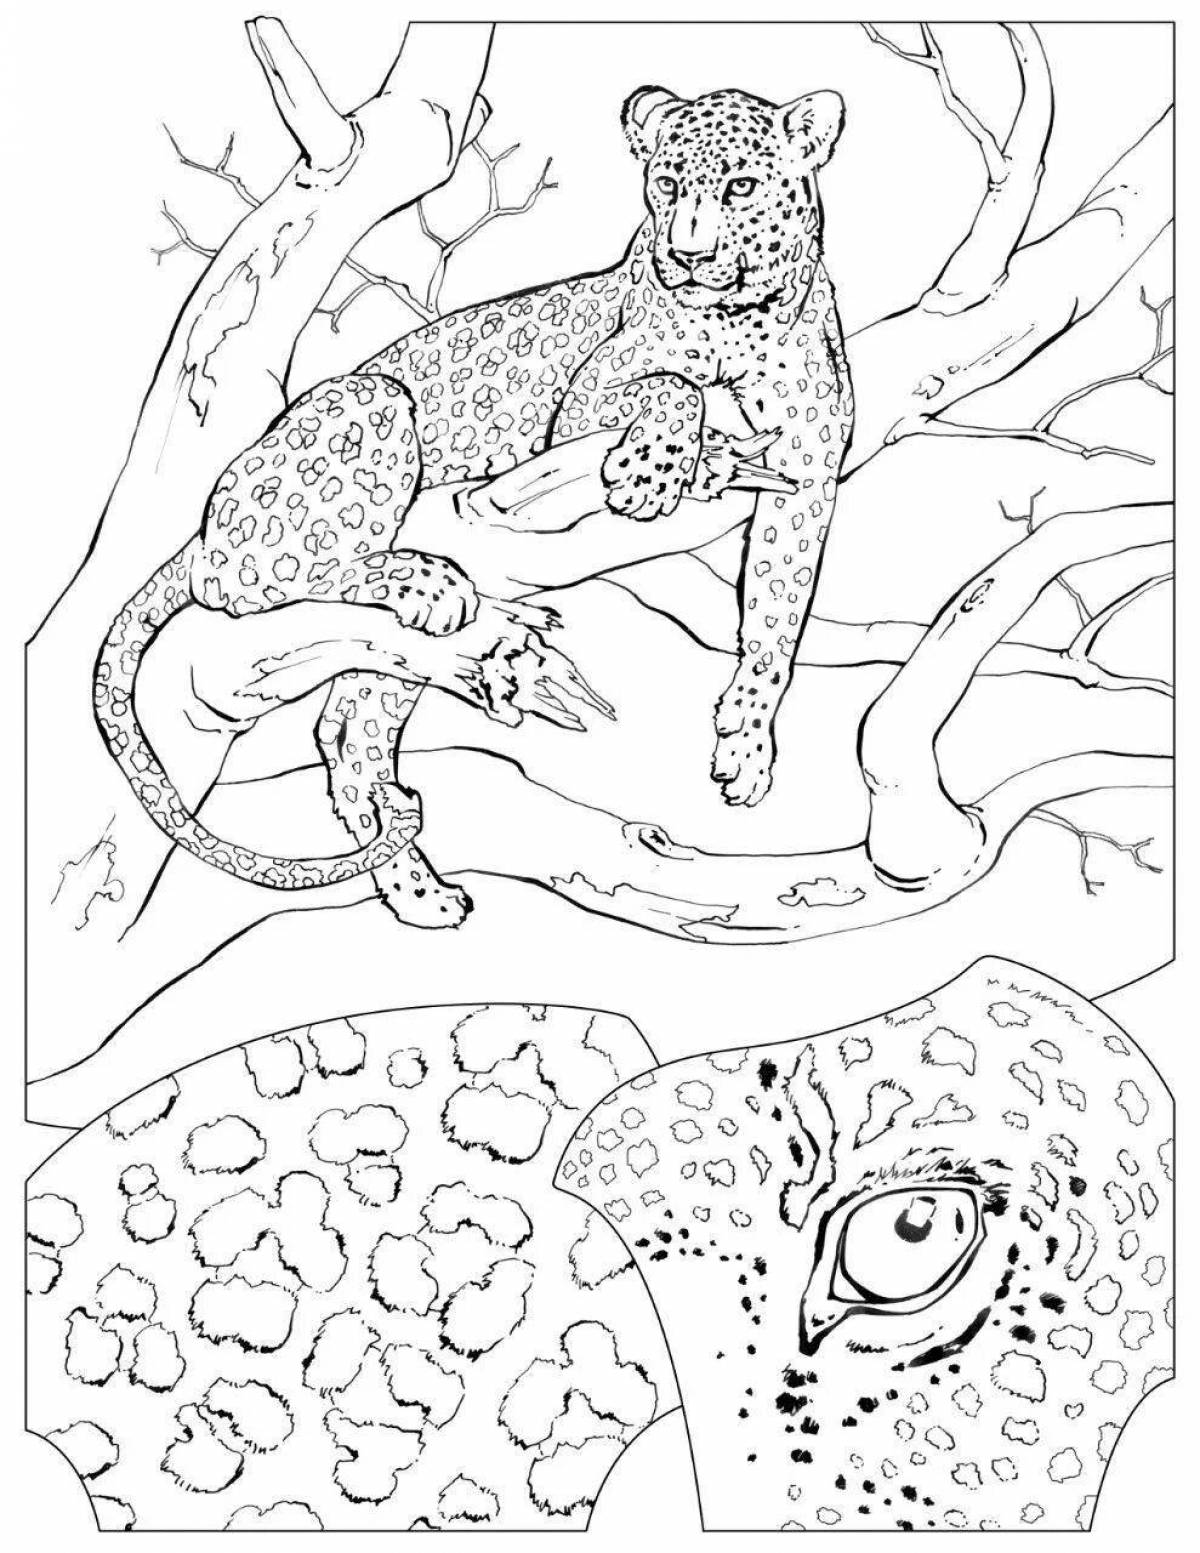 Fearless coloring pages predatory animals